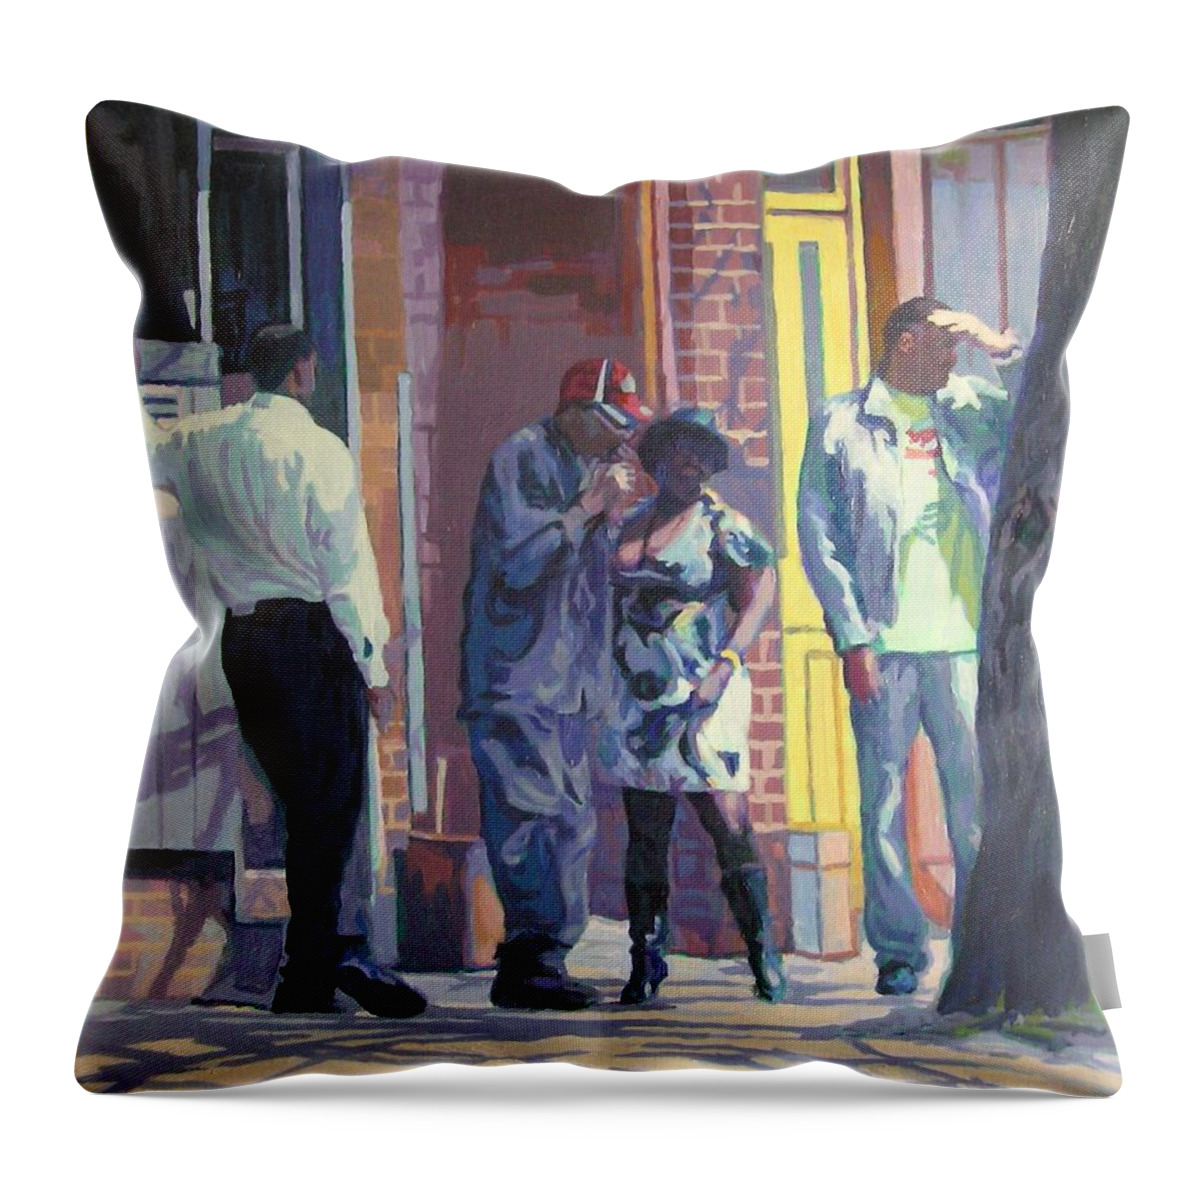 A Trip In The Inner City Throw Pillow featuring the painting The Yellow Door by David Buttram